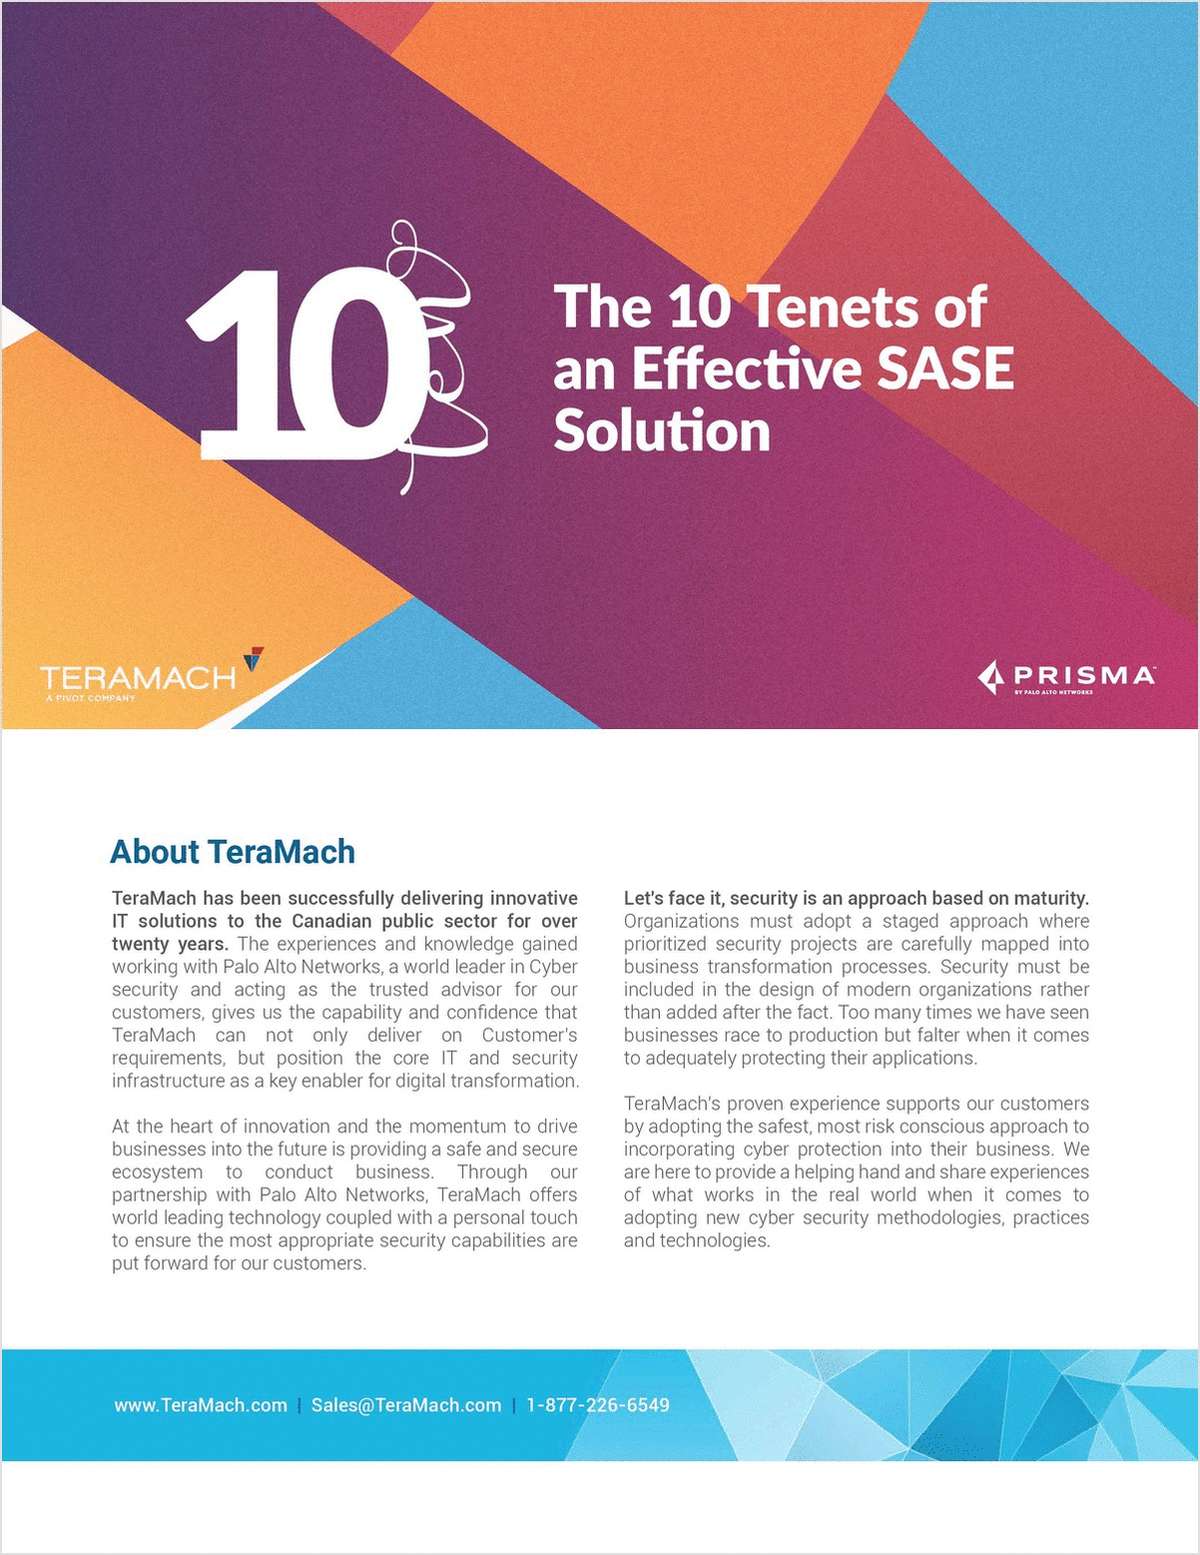 The 10 Tenets of an Effective SASE Solution